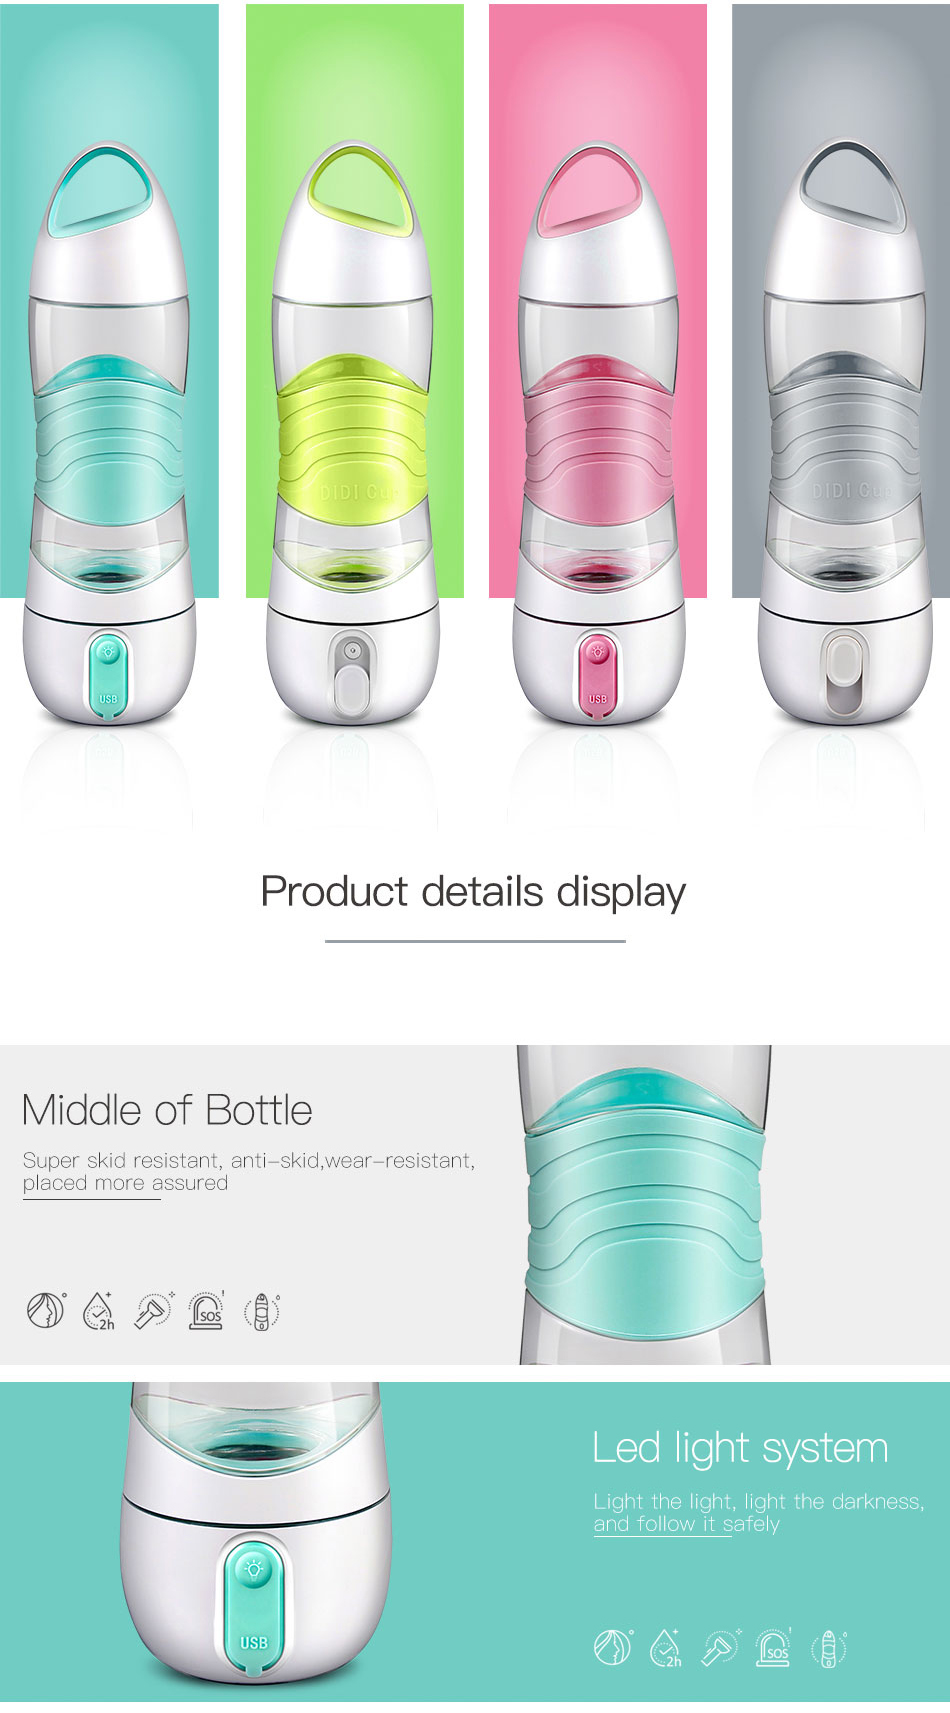 KCASA-DDH8 Portable USB Air Humidifier Spray 400ML Water Bottles Creative Outdoor Drinking Cup Sports Spray Bottle with Light 107